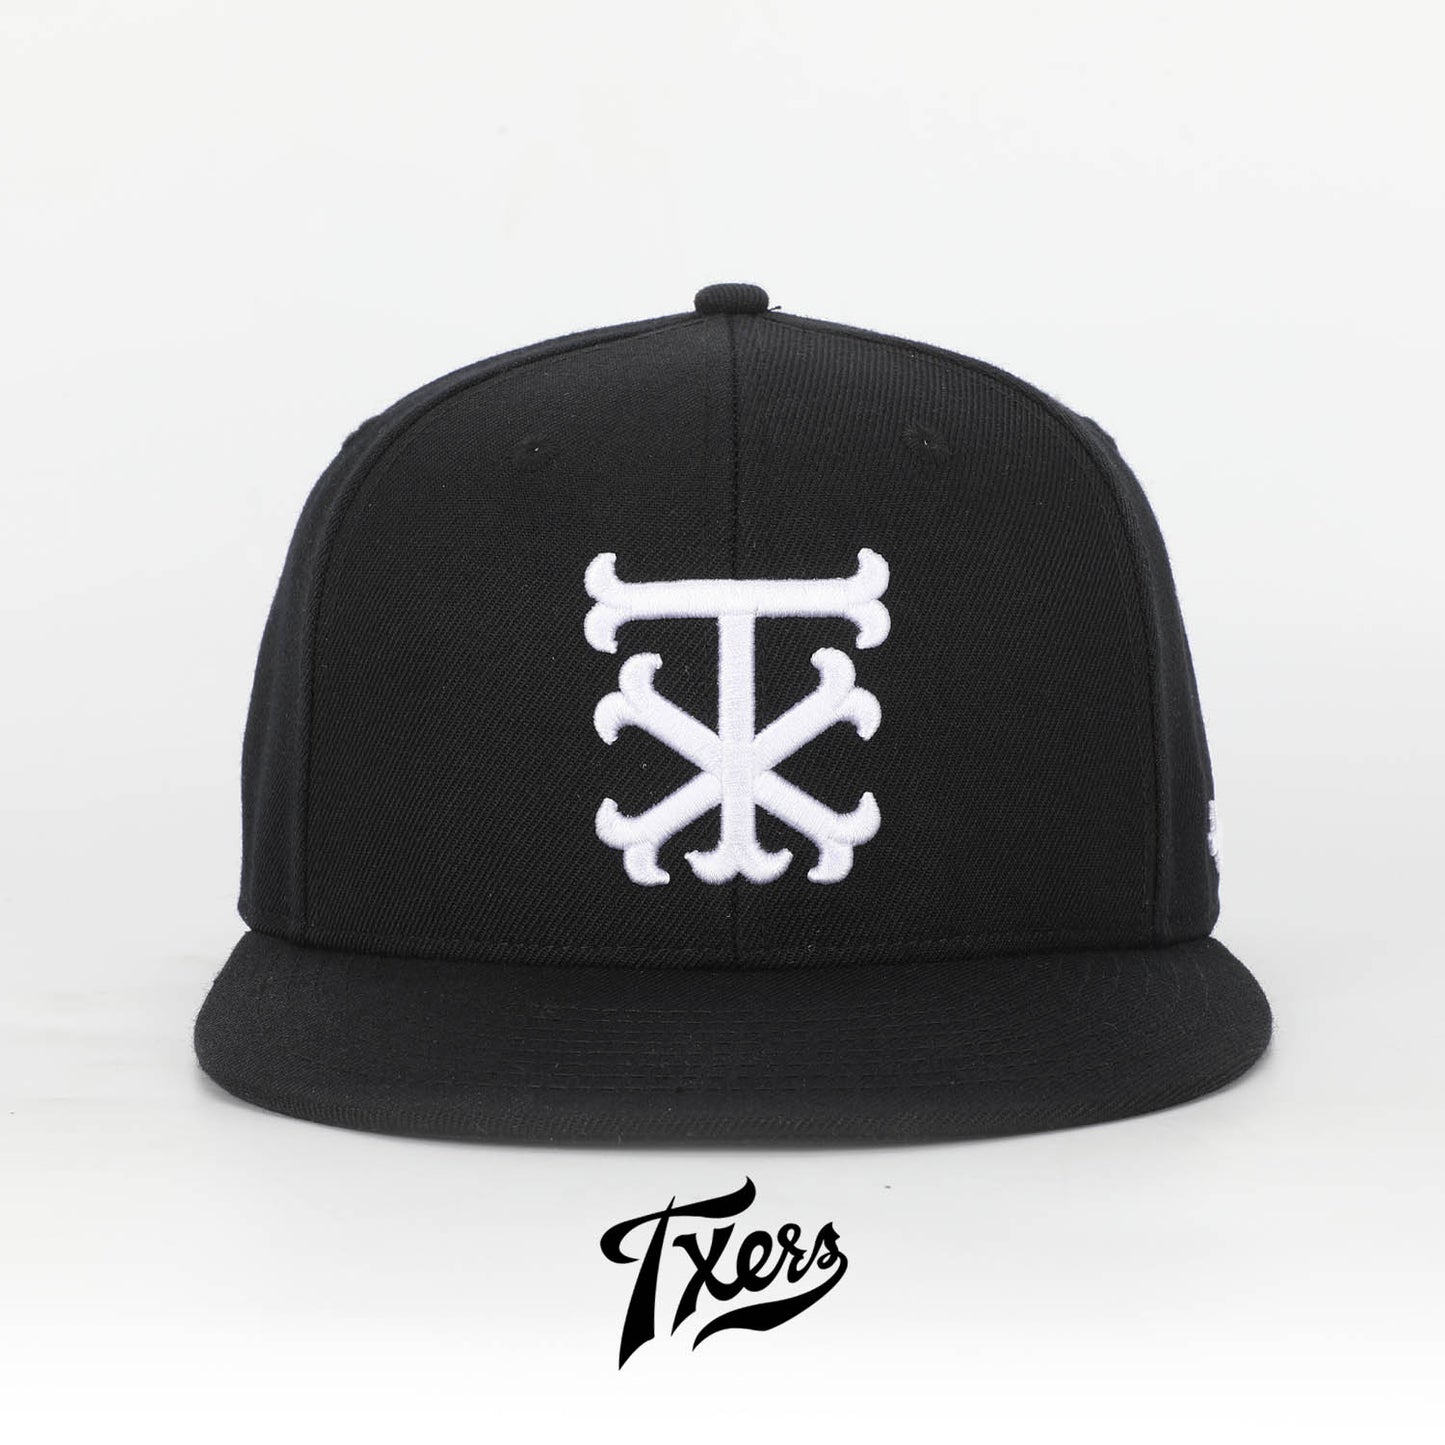 Txers, Txers Gear, Ruthless, Texas hat, TX hat, Texas, New era, Snapback, Texas, Texas hat, Snapback hat, Facebook, Purchase, Add to cart, 59fifty